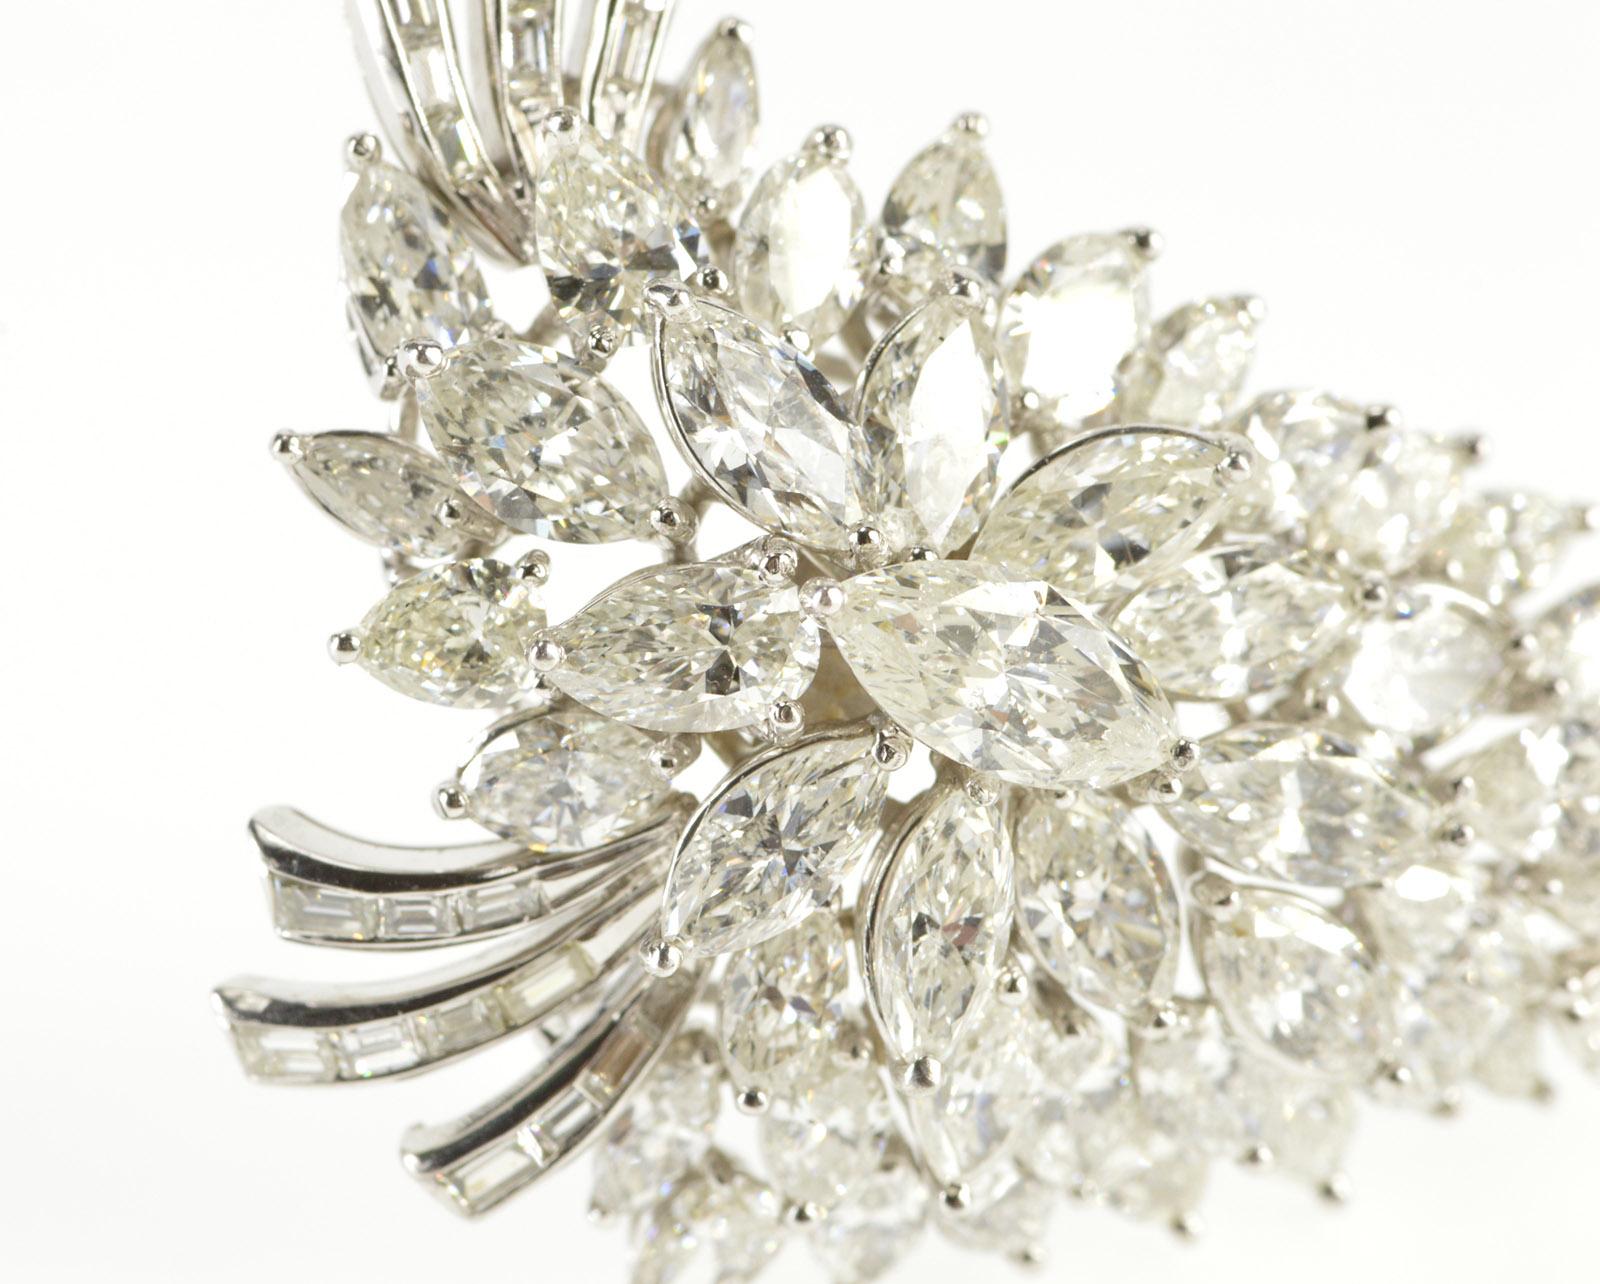 A Grand Marquise of diamonds, this tantalizing piece by Elwood Van Clief doubles as both a pendant and a brooch. Featuring an exquisite combination of marquise diamonds, the piece contains 25x .20 carat marquise diamonds totaling 5 carats, 15x .25